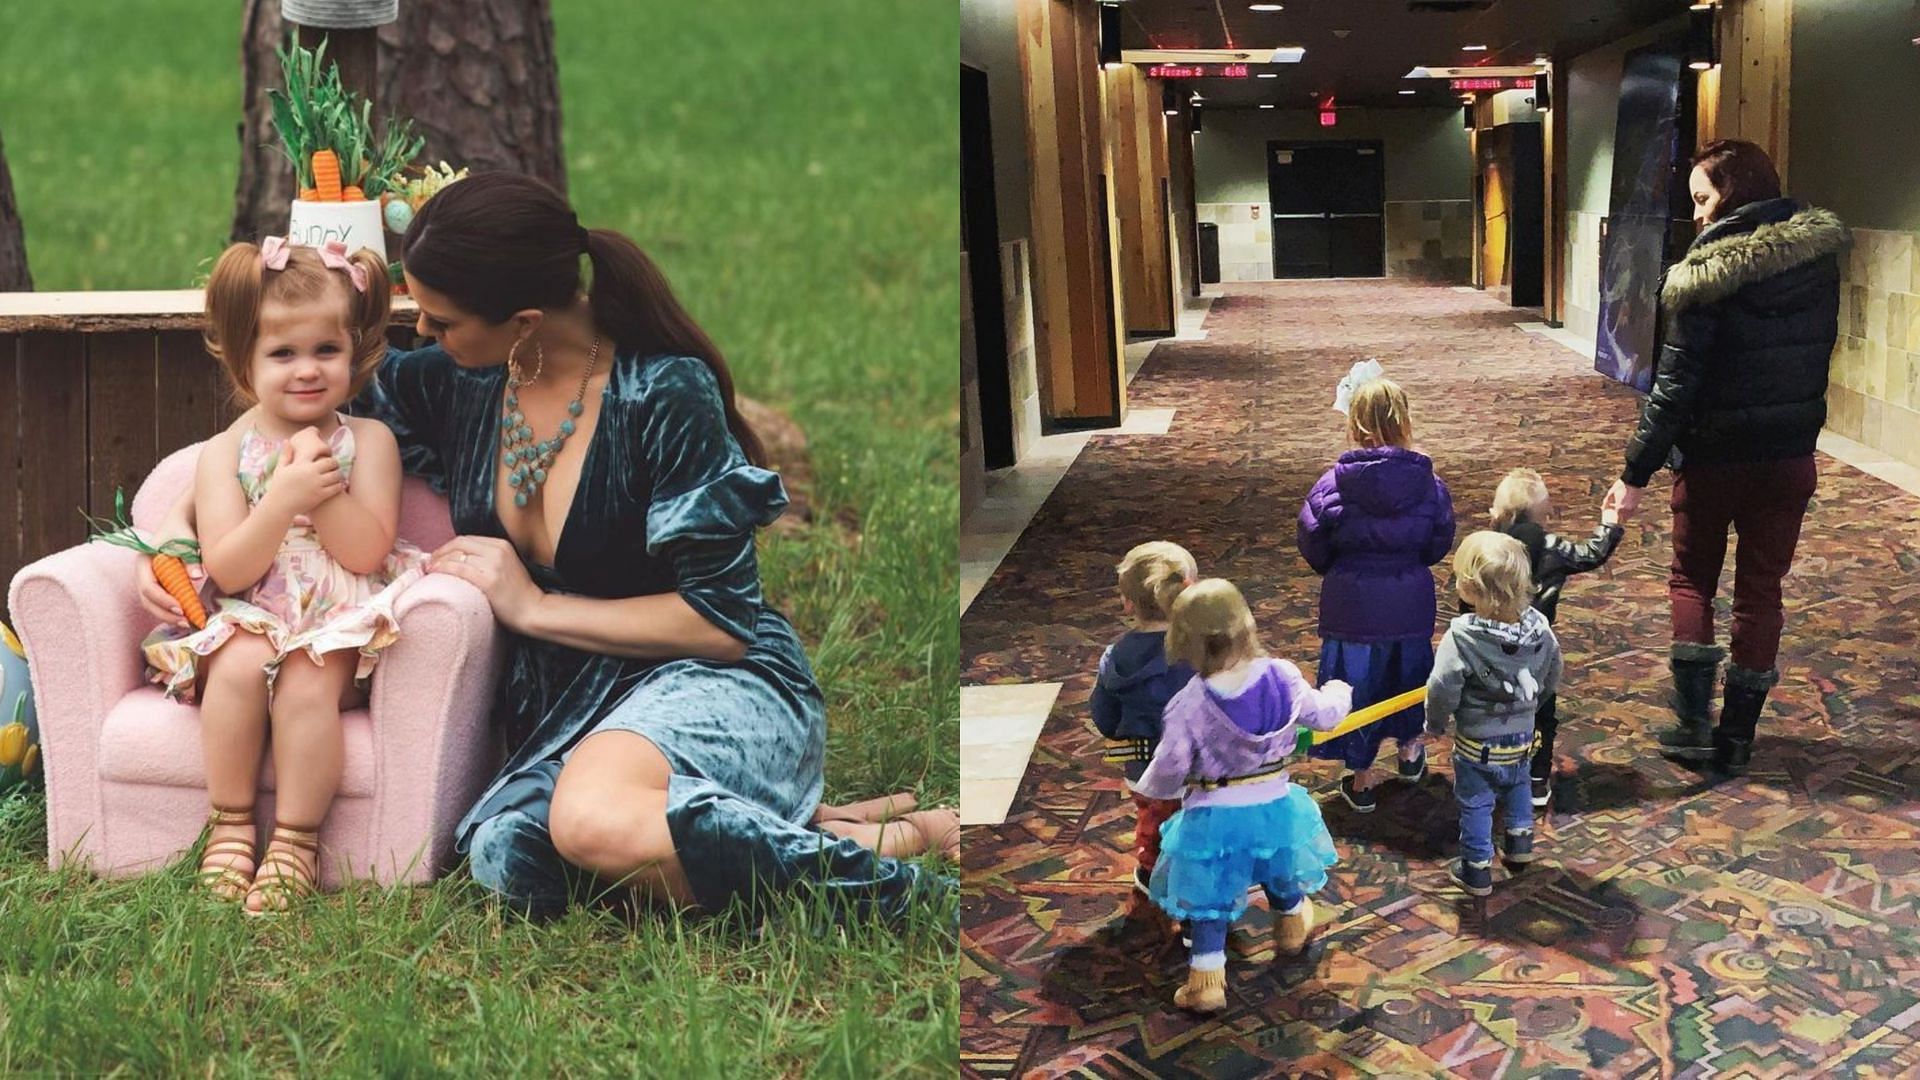 Brooke Adams with her daughter (left) and Christy Hemme with her children (right